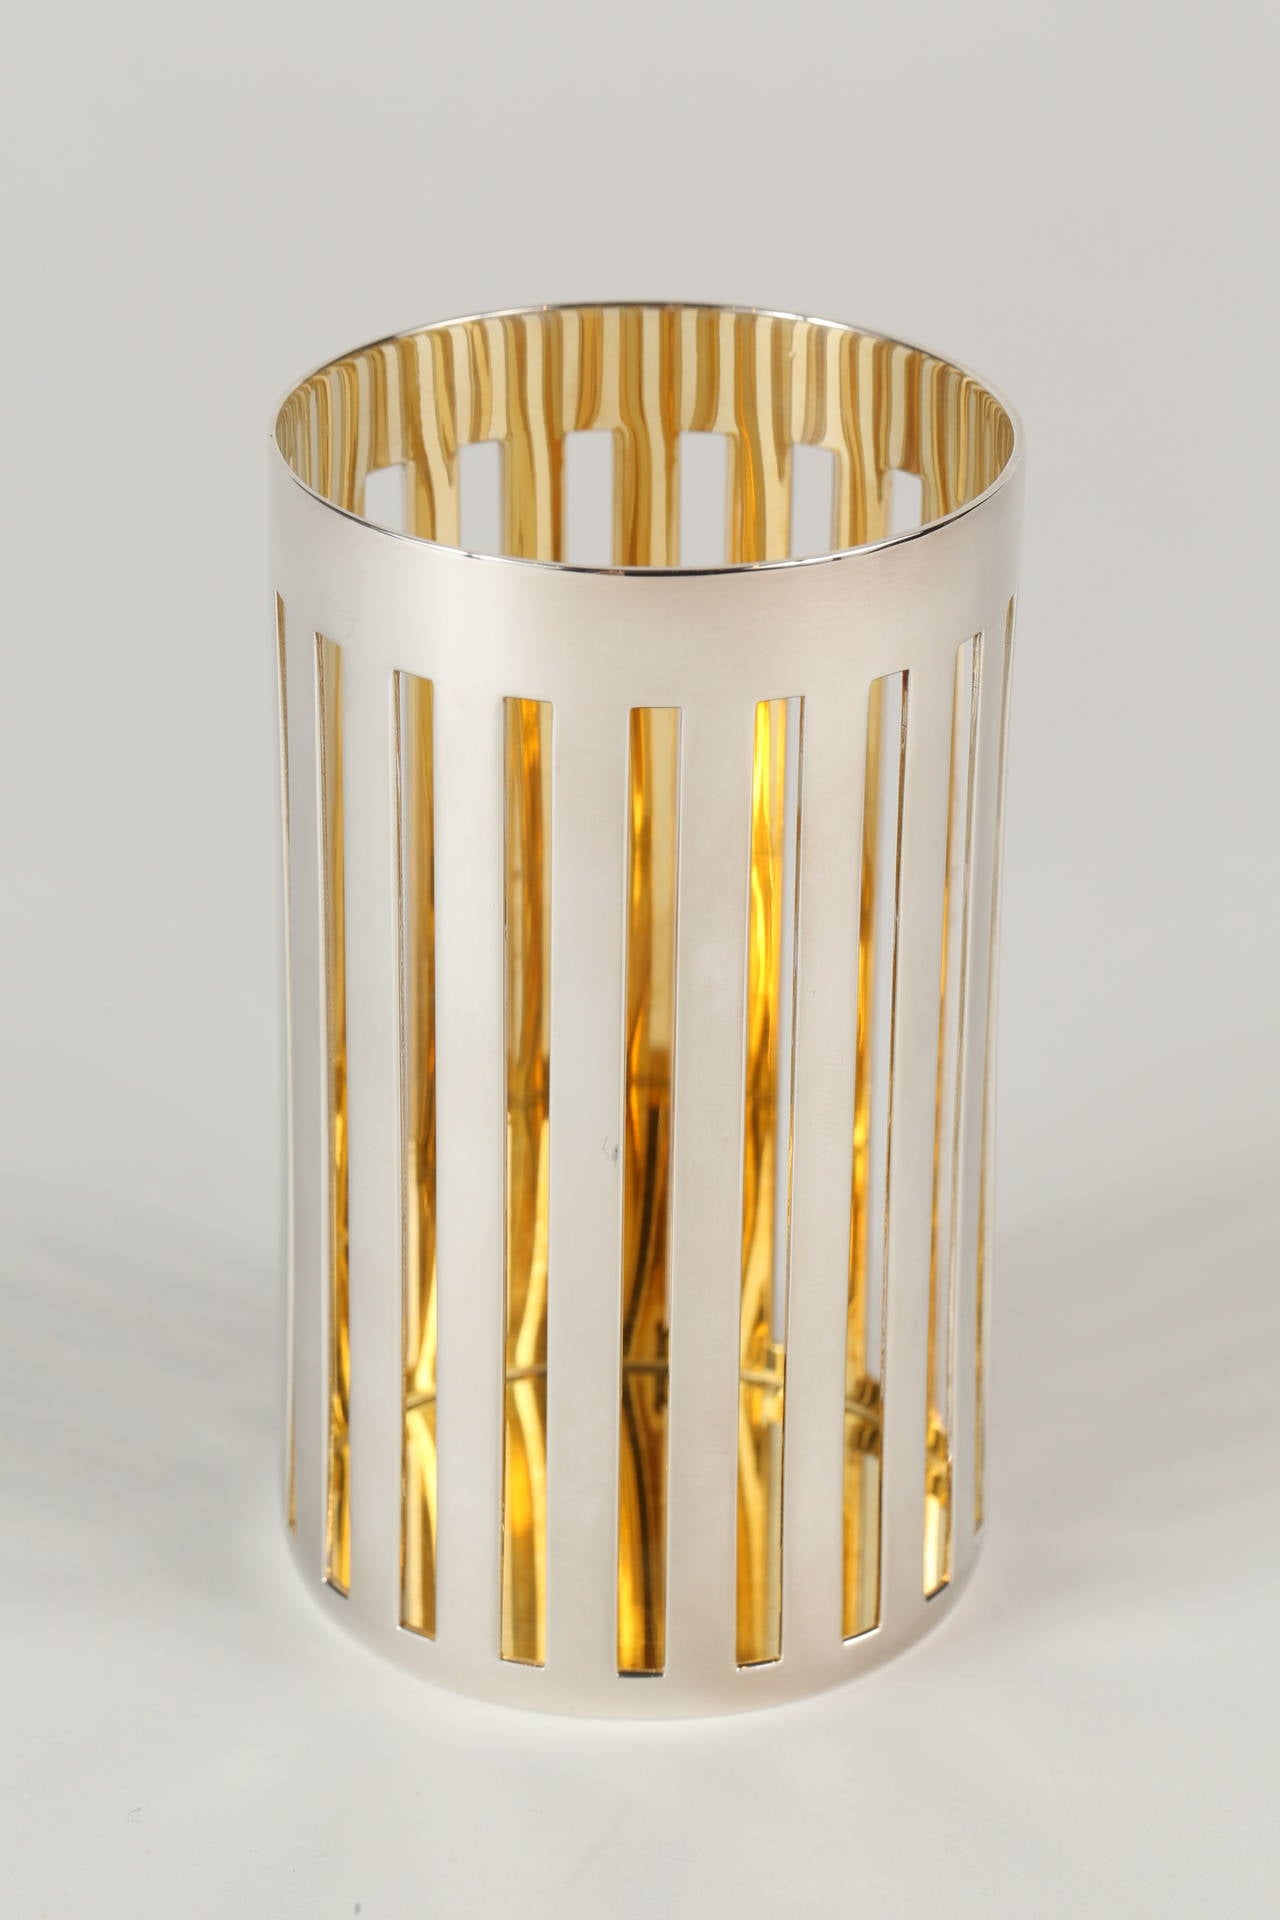 A chic Bulgari sterling silver pencil cup with a vermeil interior and cut-out details along the side. Stamped on the side 